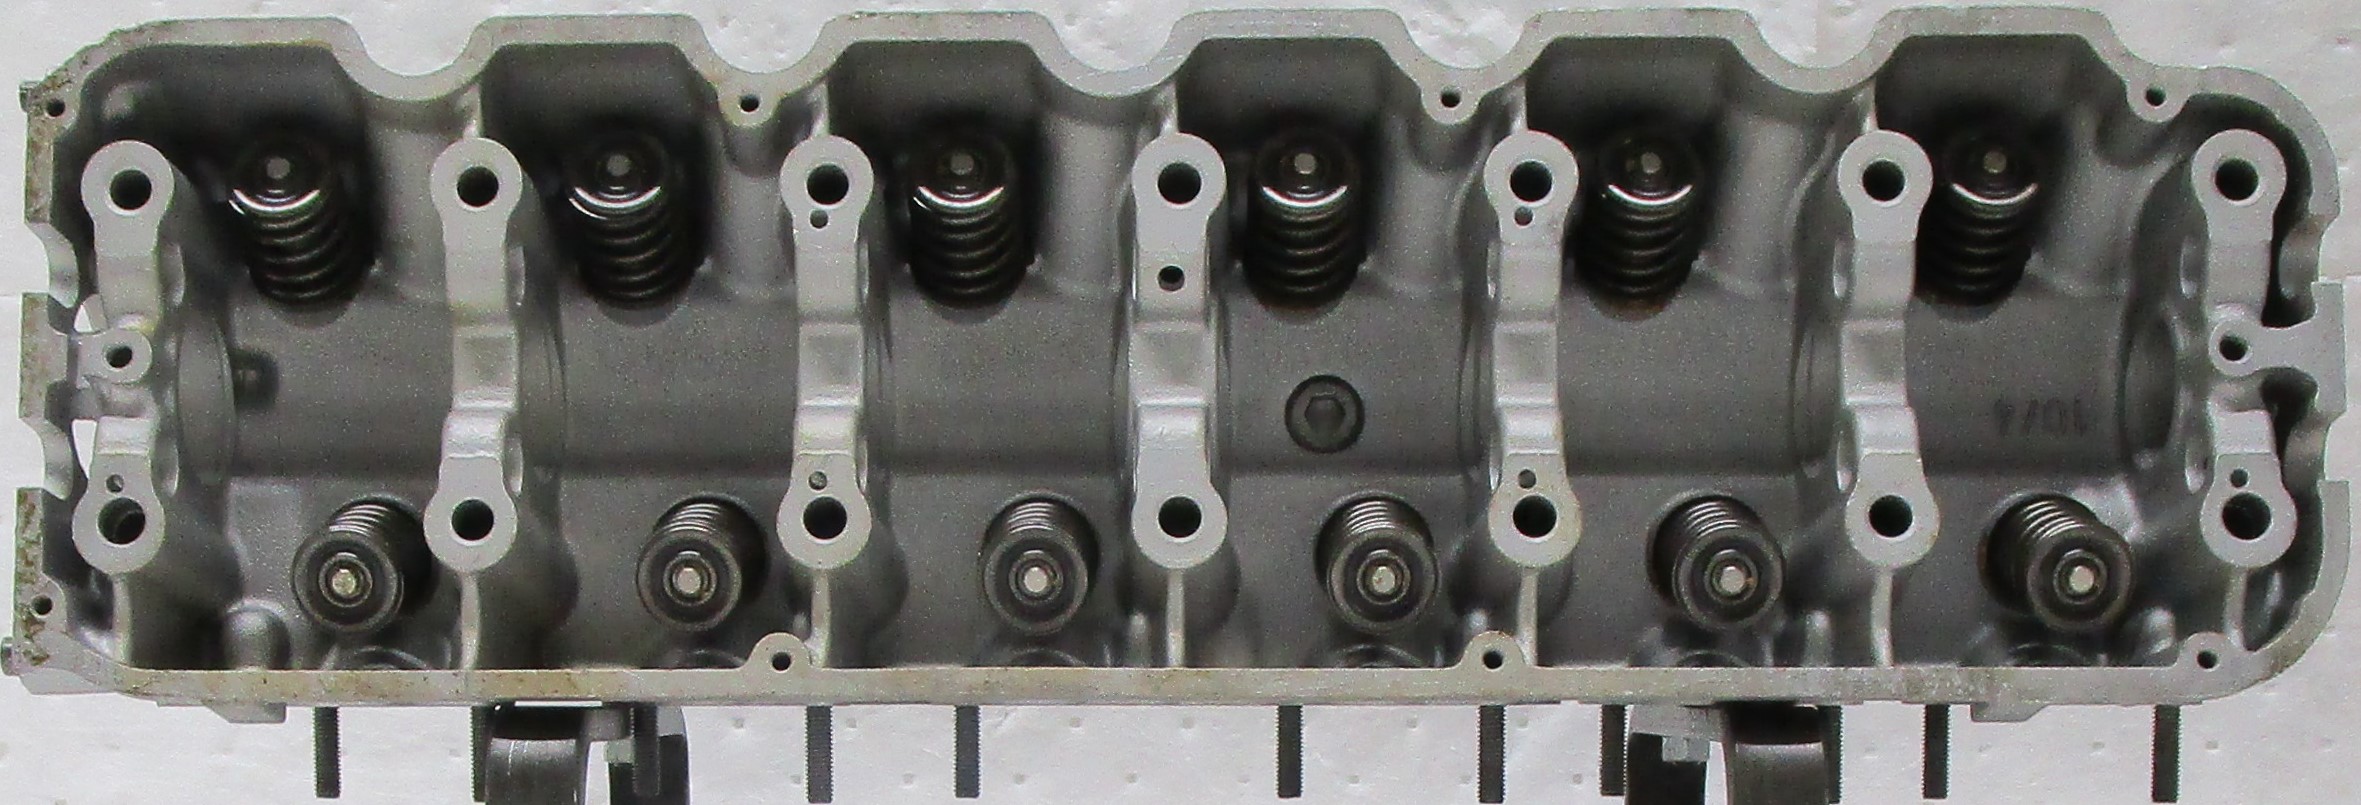 1982-1987 BMW 325, 528E L6, 2.7L / 164 CID SOHC 12 Valve - Casting # 1264200 Eng Code : M20B27 Reconditioned Cylinder Head With Valves and Springs WO / Cams ($100 Core Charge )